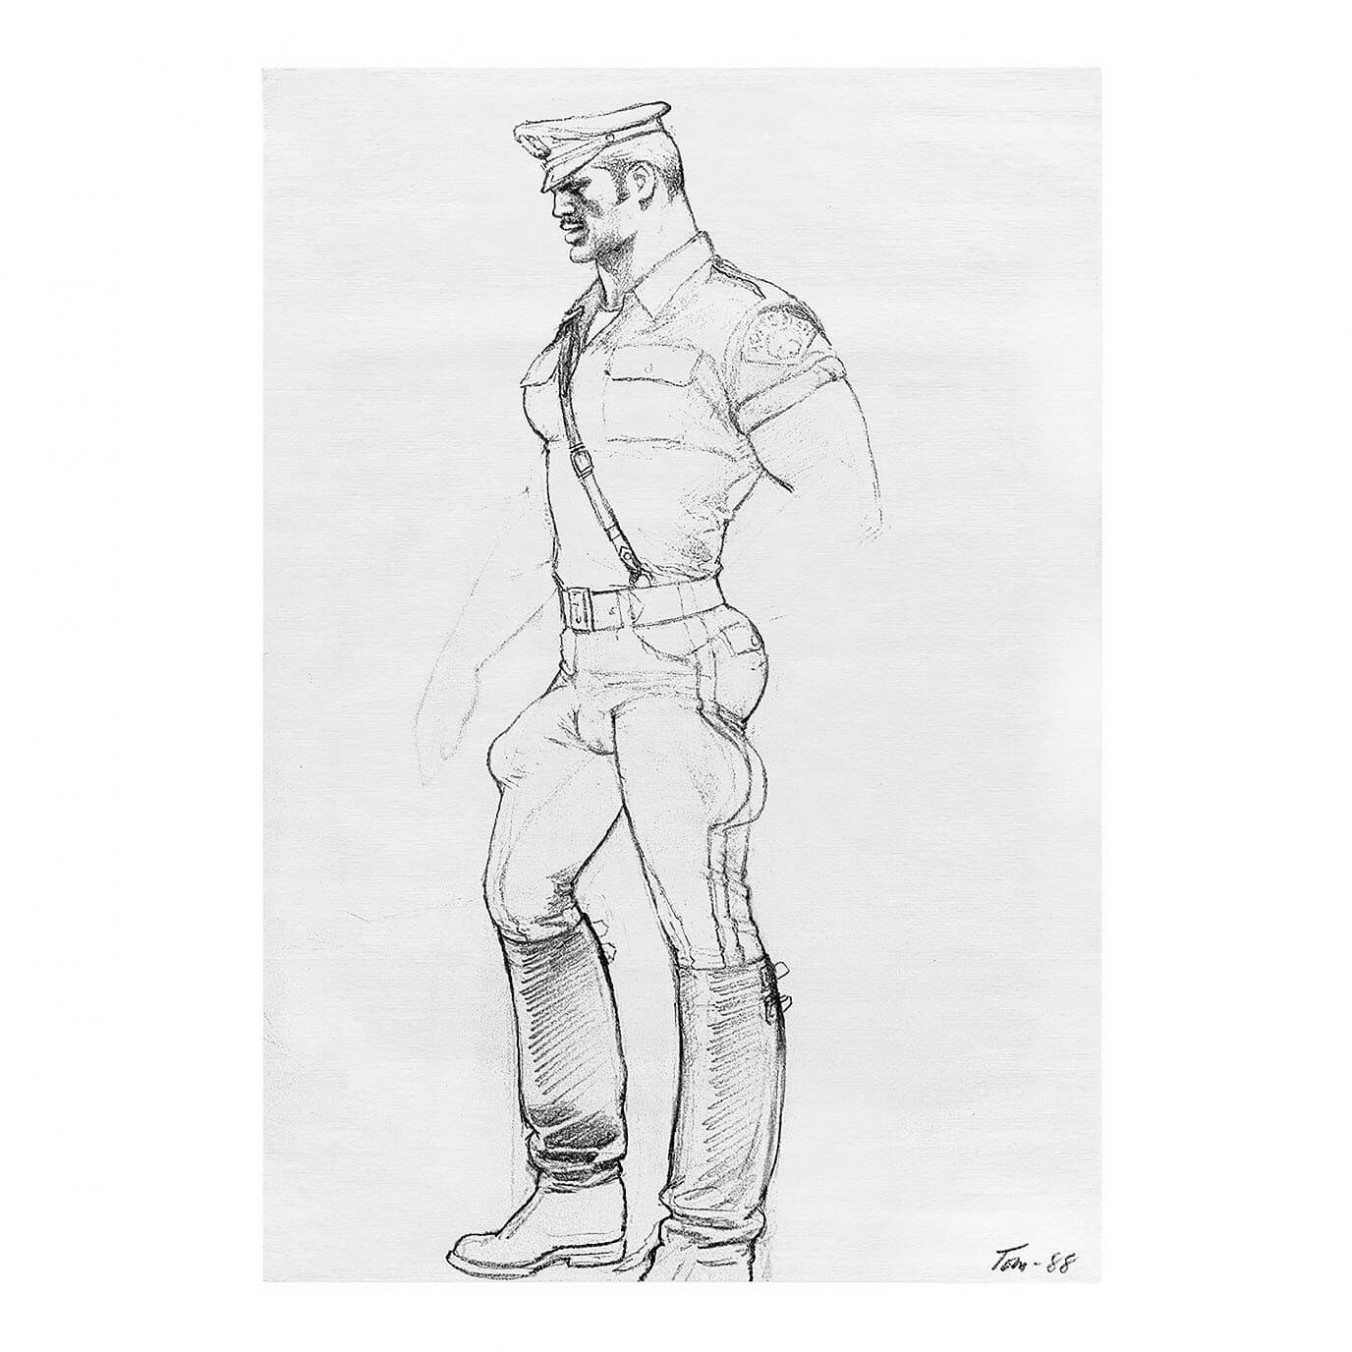 TOM OF FINLAND - Untitled, 1988